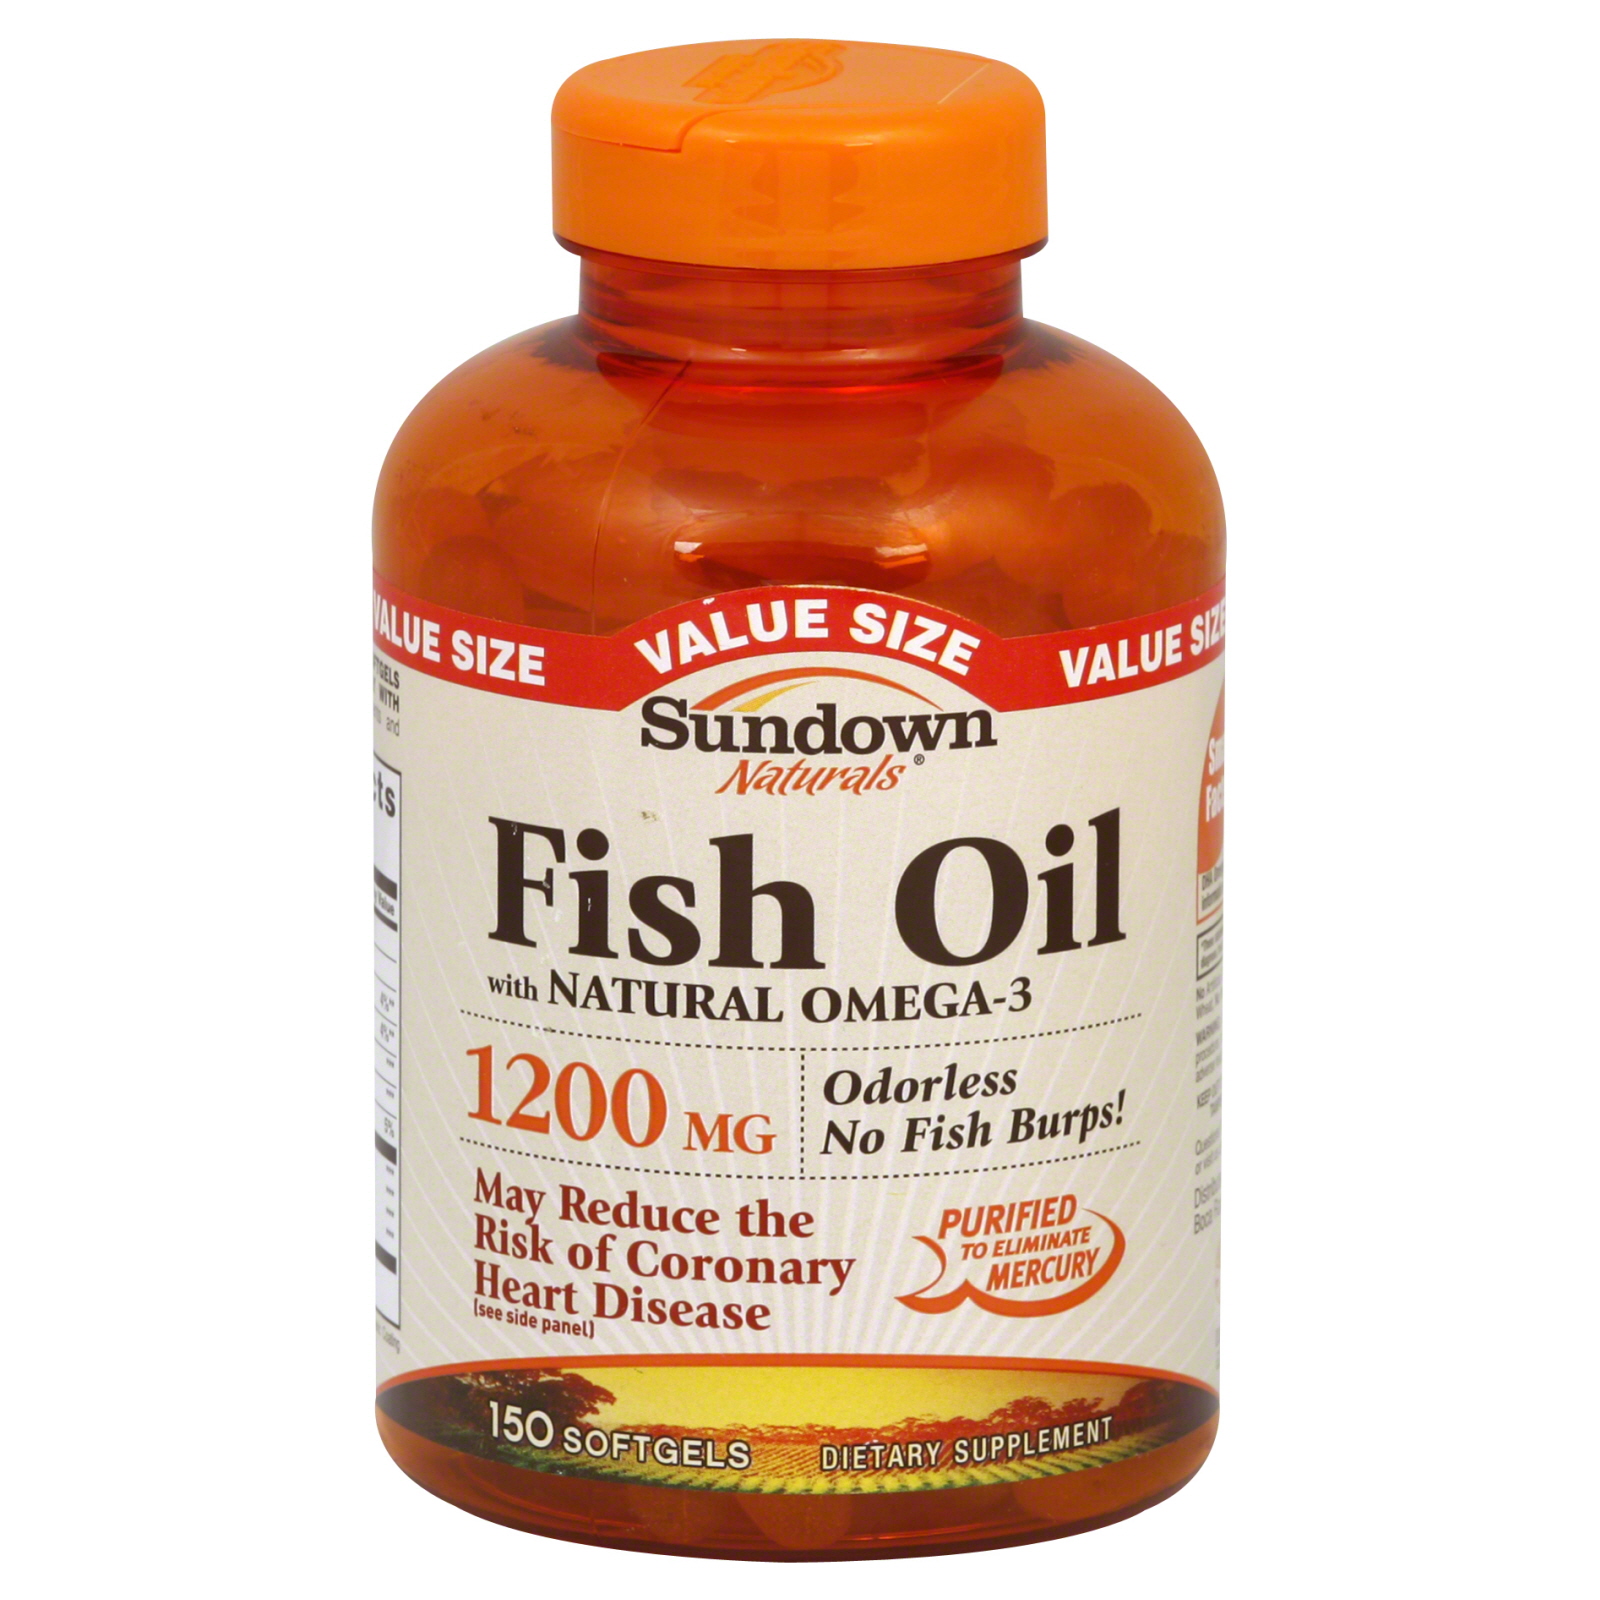 Sundown Fish Oil, Extra Strength, 1200 mg, with Natural Omega-3, 150 Softgels, Value Size